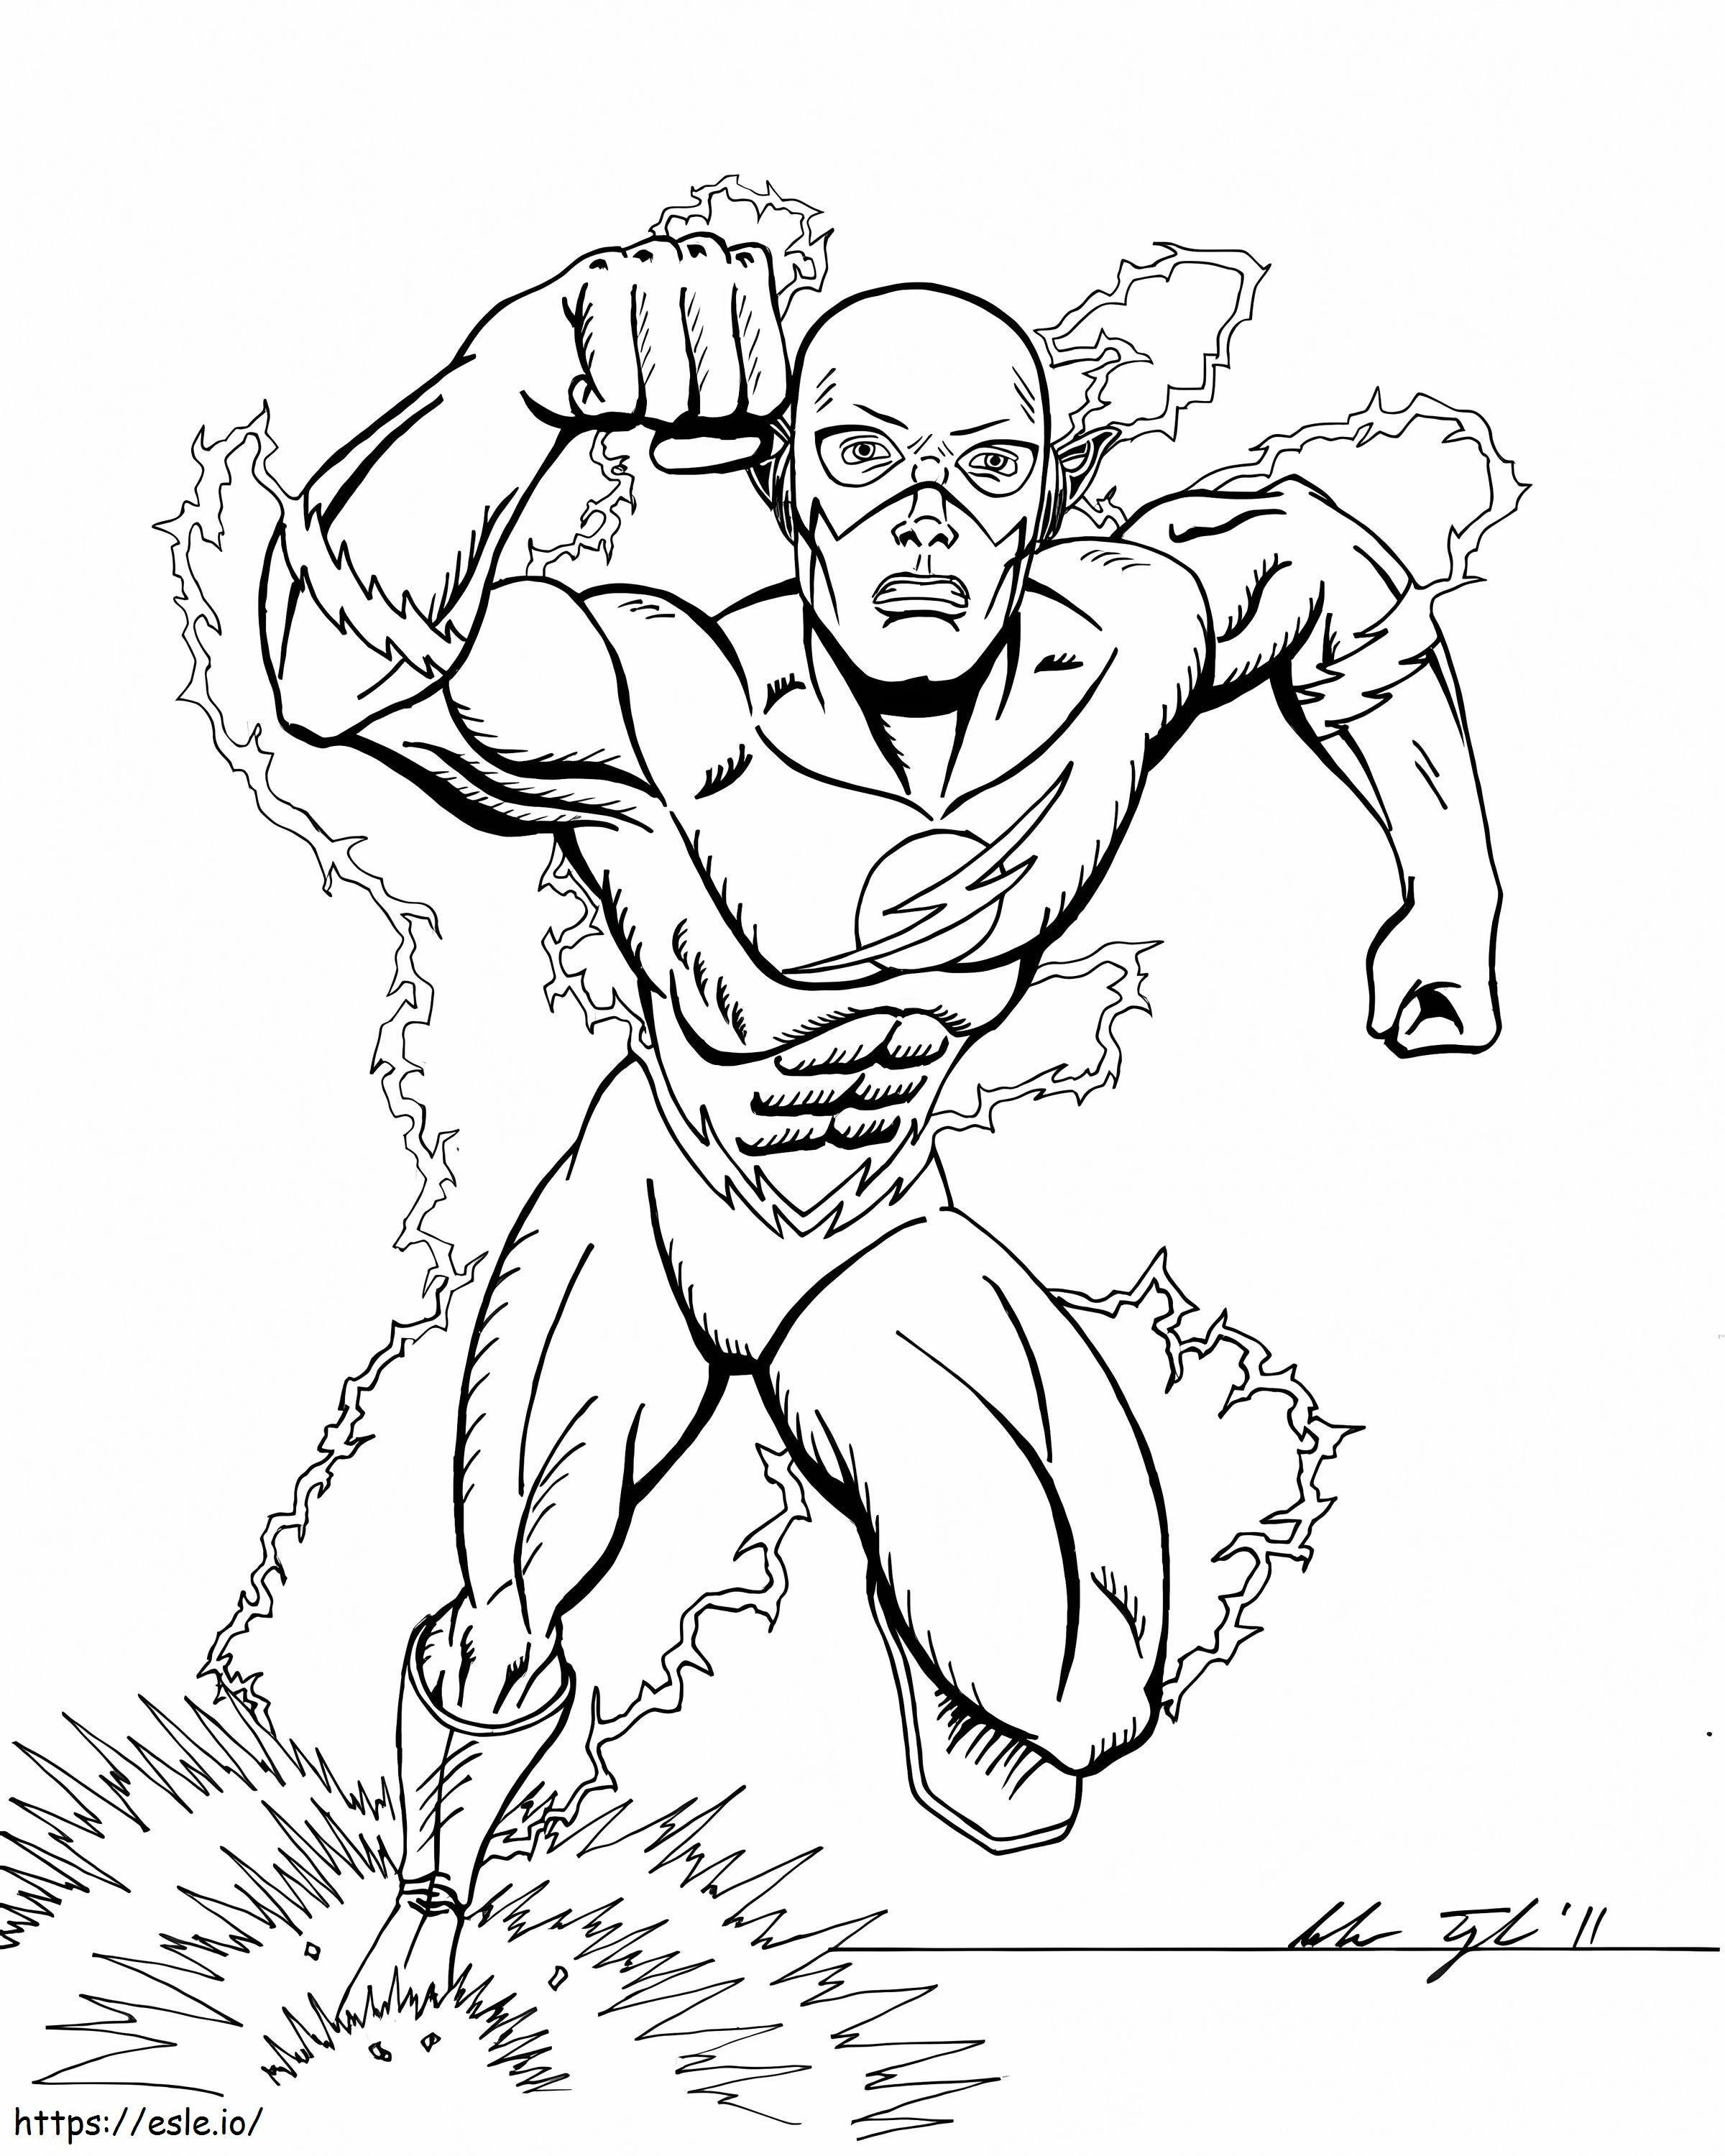 Flash 2 coloring page